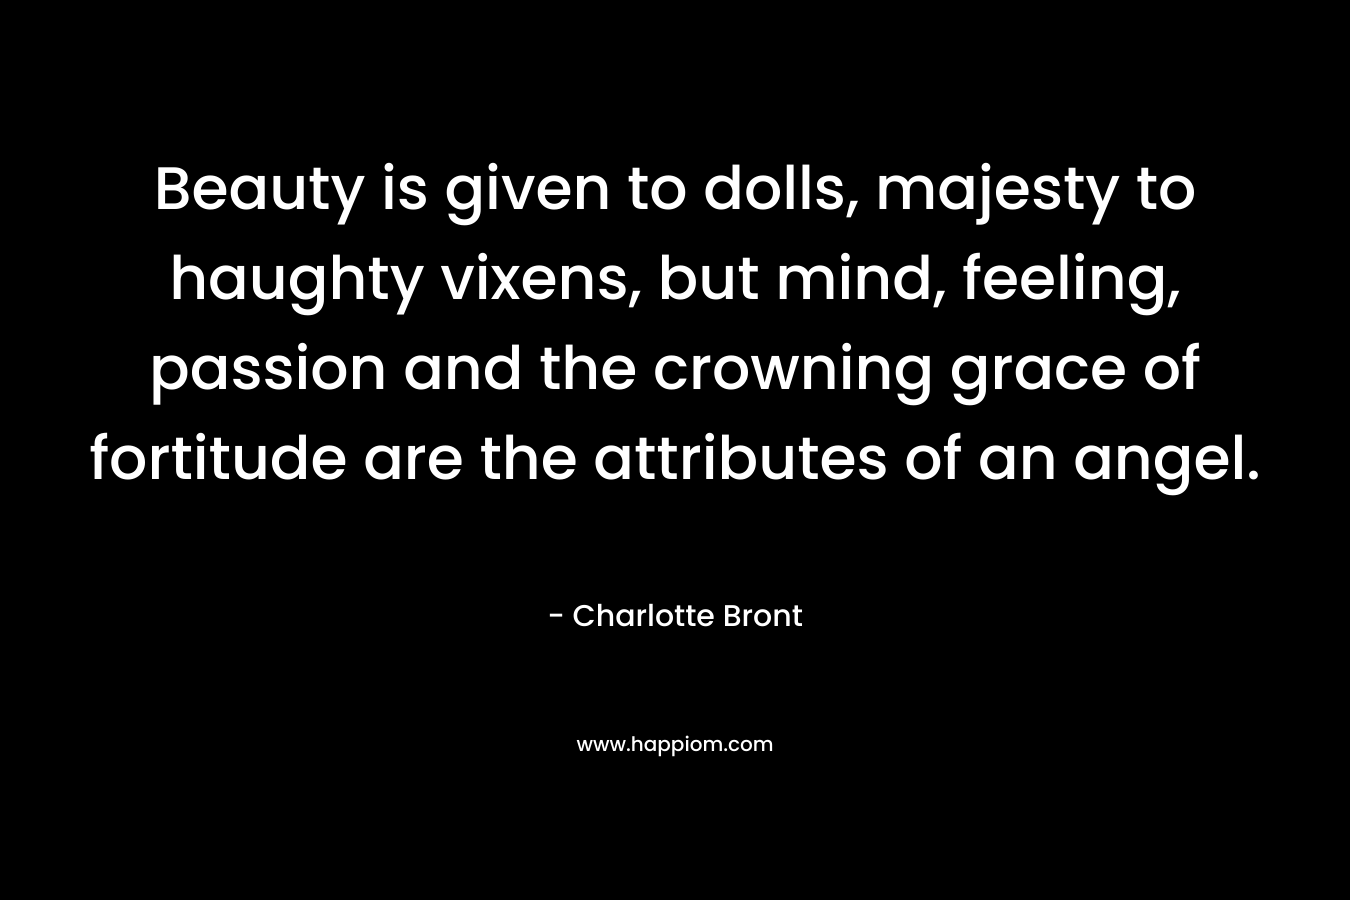 Beauty is given to dolls, majesty to haughty vixens, but mind, feeling, passion and the crowning grace of fortitude are the attributes of an angel. – Charlotte Bront